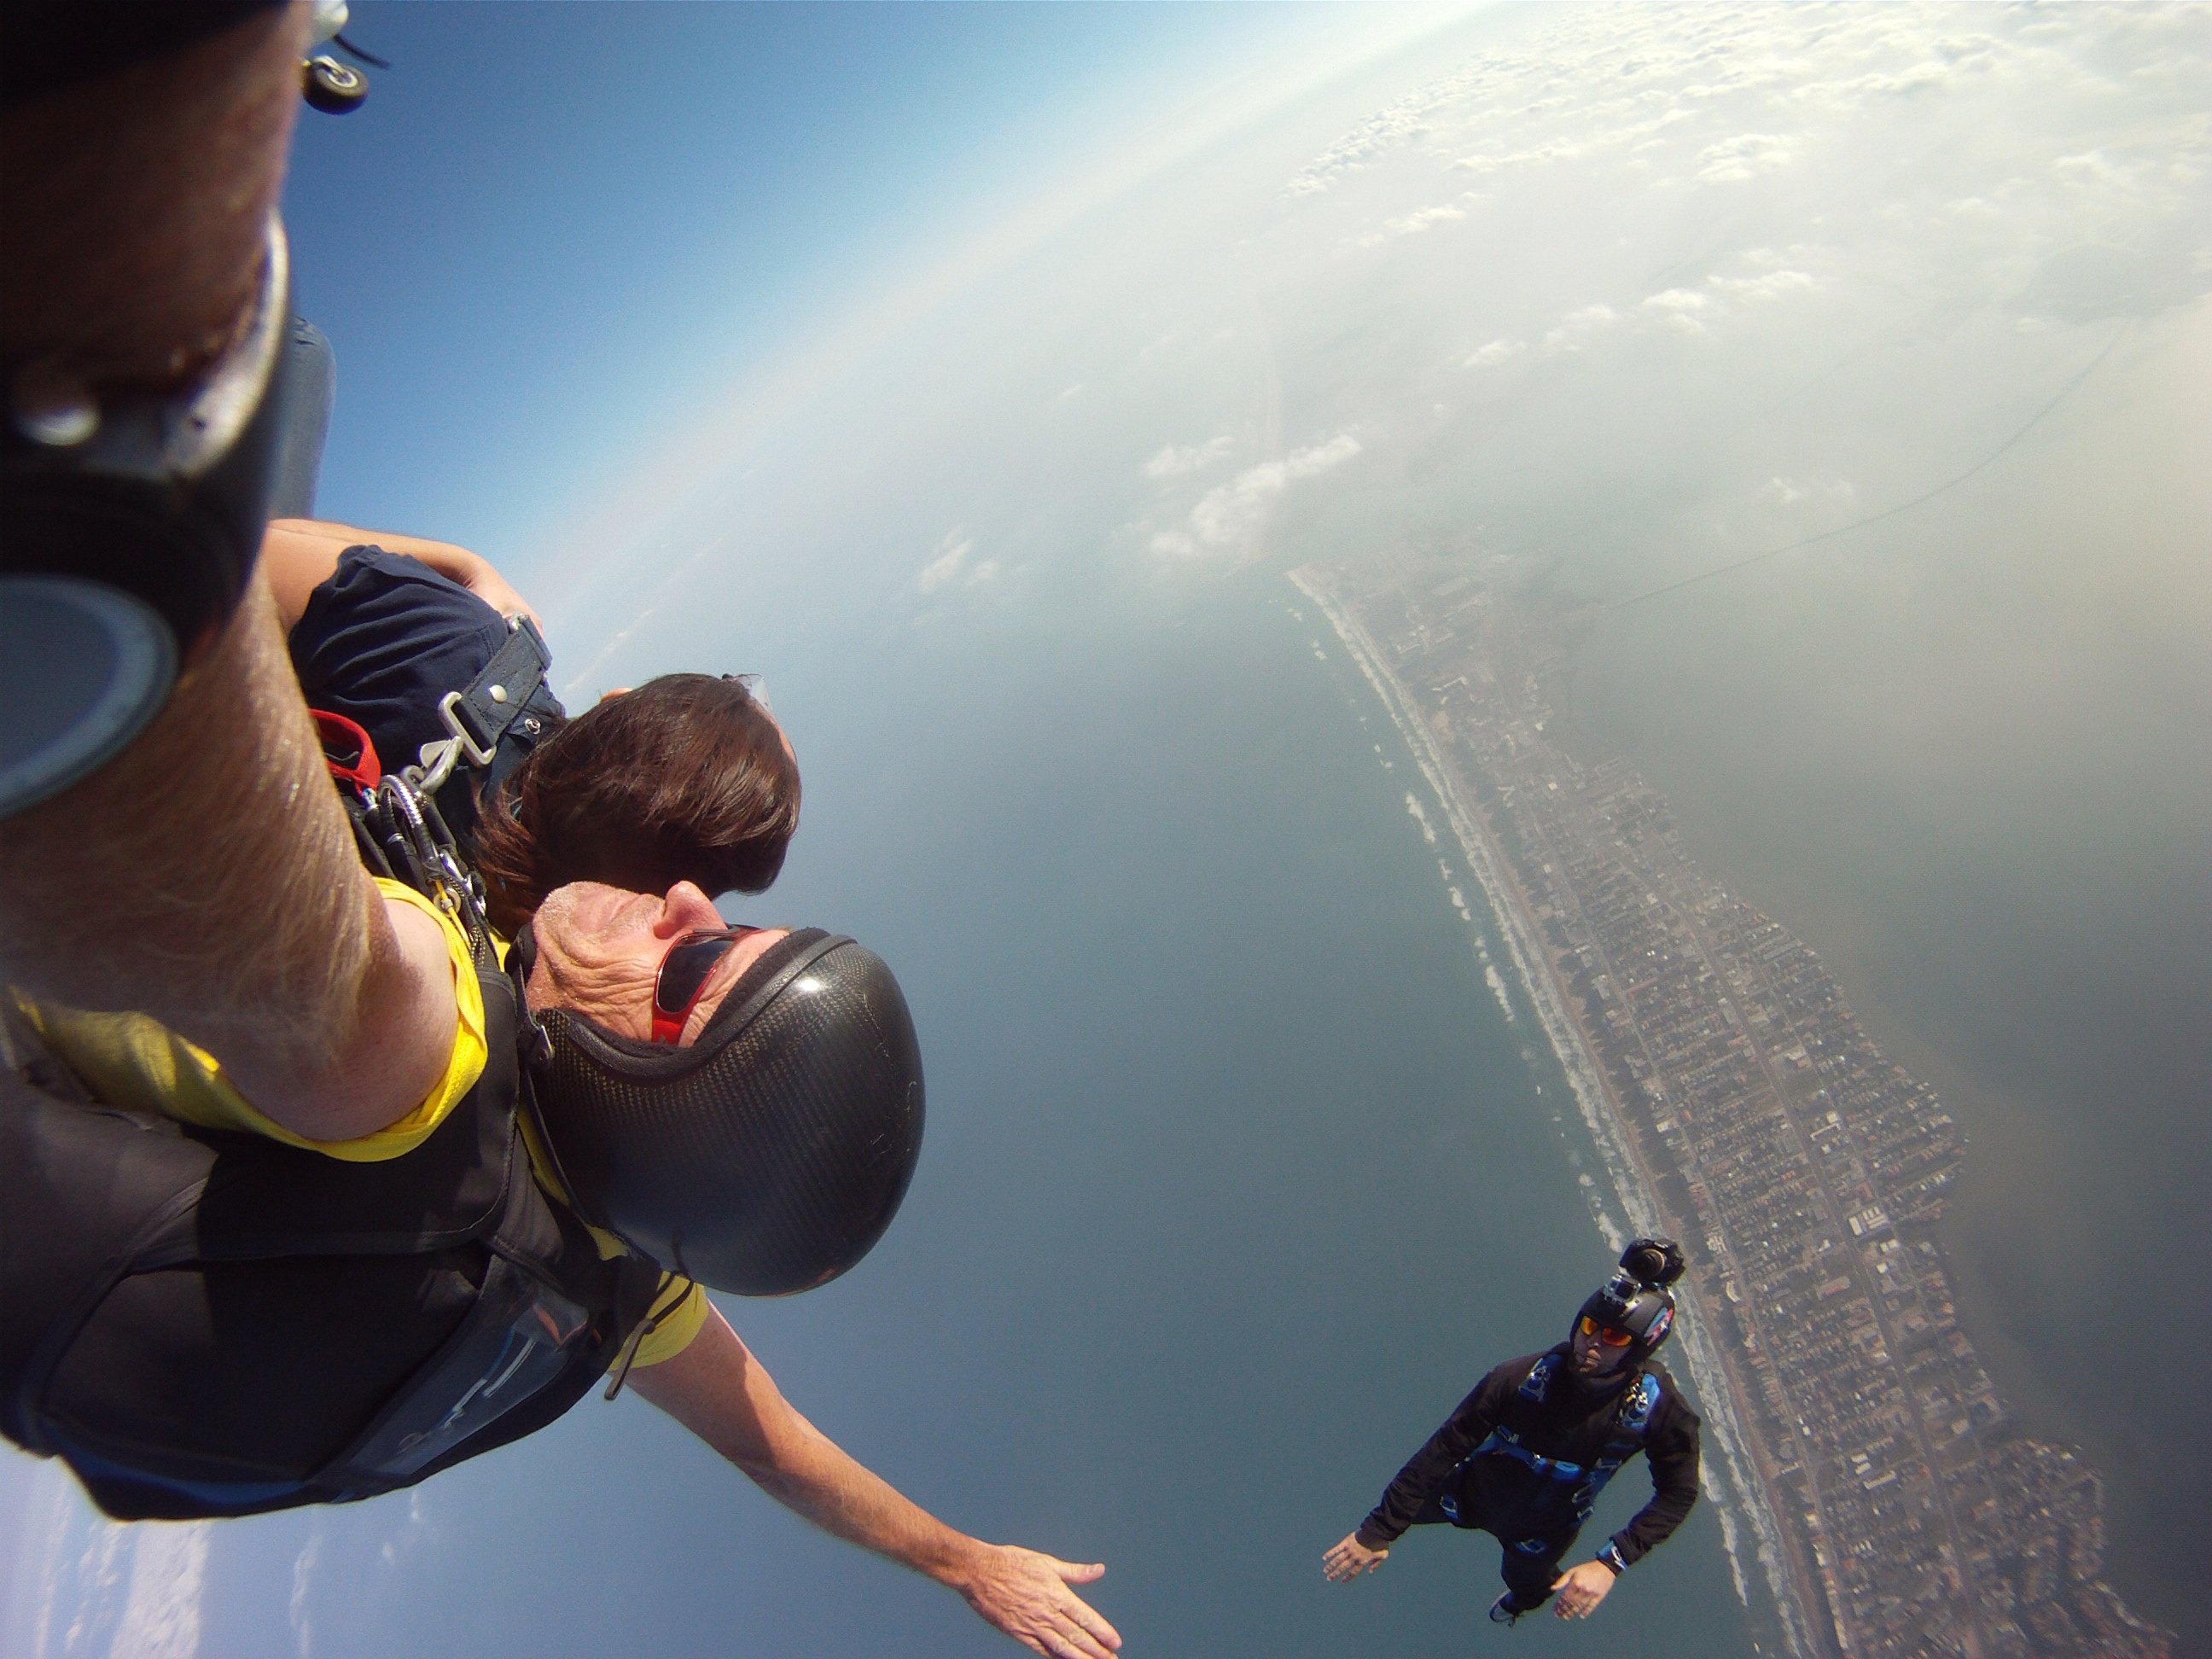 Skydive South Padre Island Texas